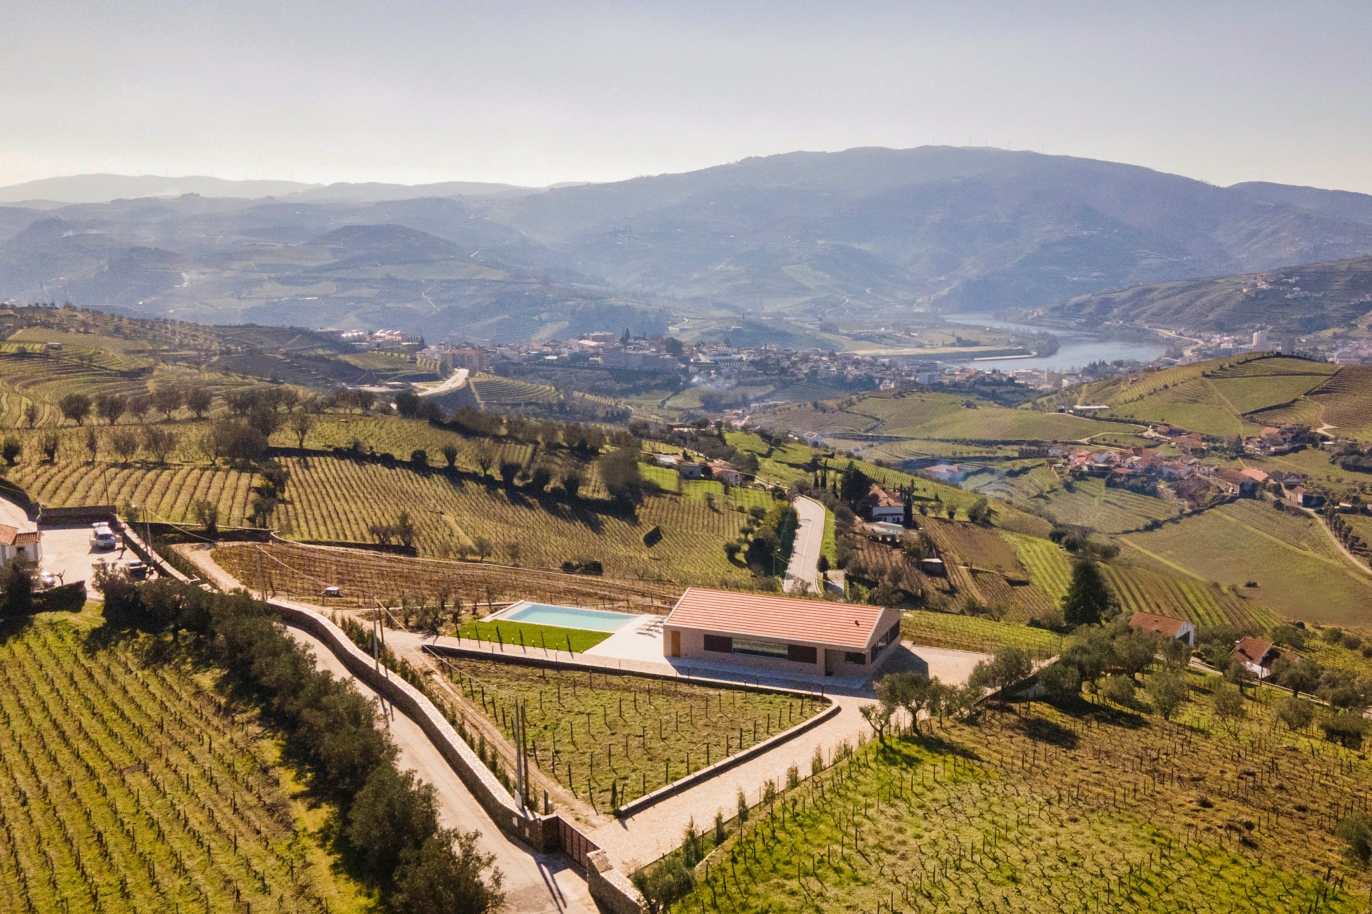  Douro Valley Gem: Spectacular Property with Unrivaled River Views in Portugal